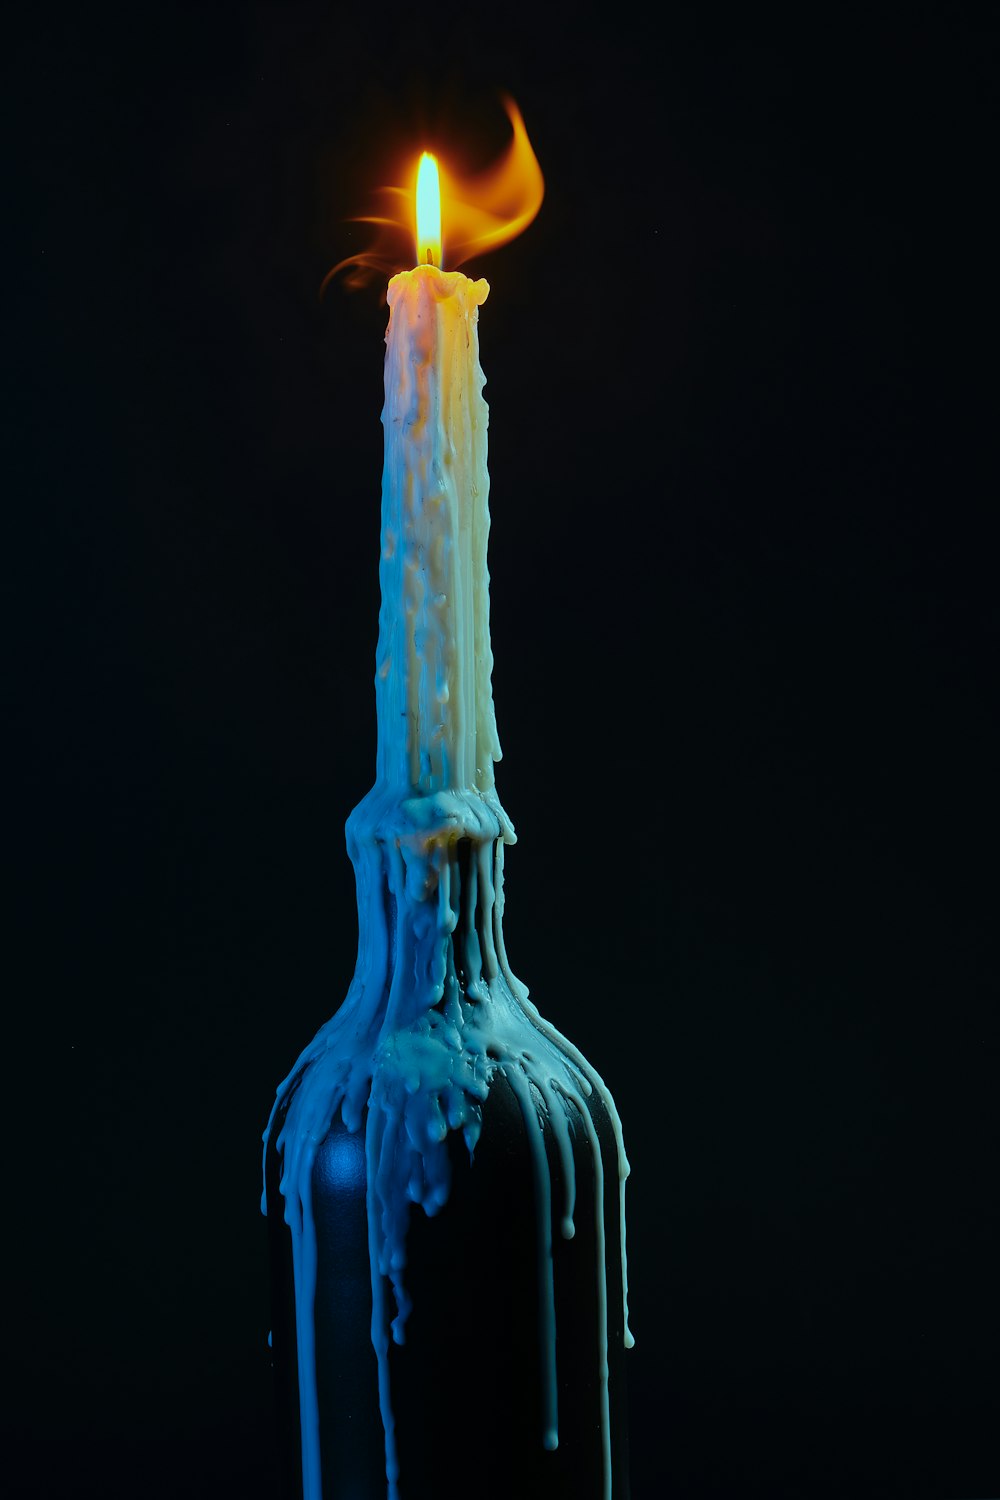 a lit candle in a bottle that is melting